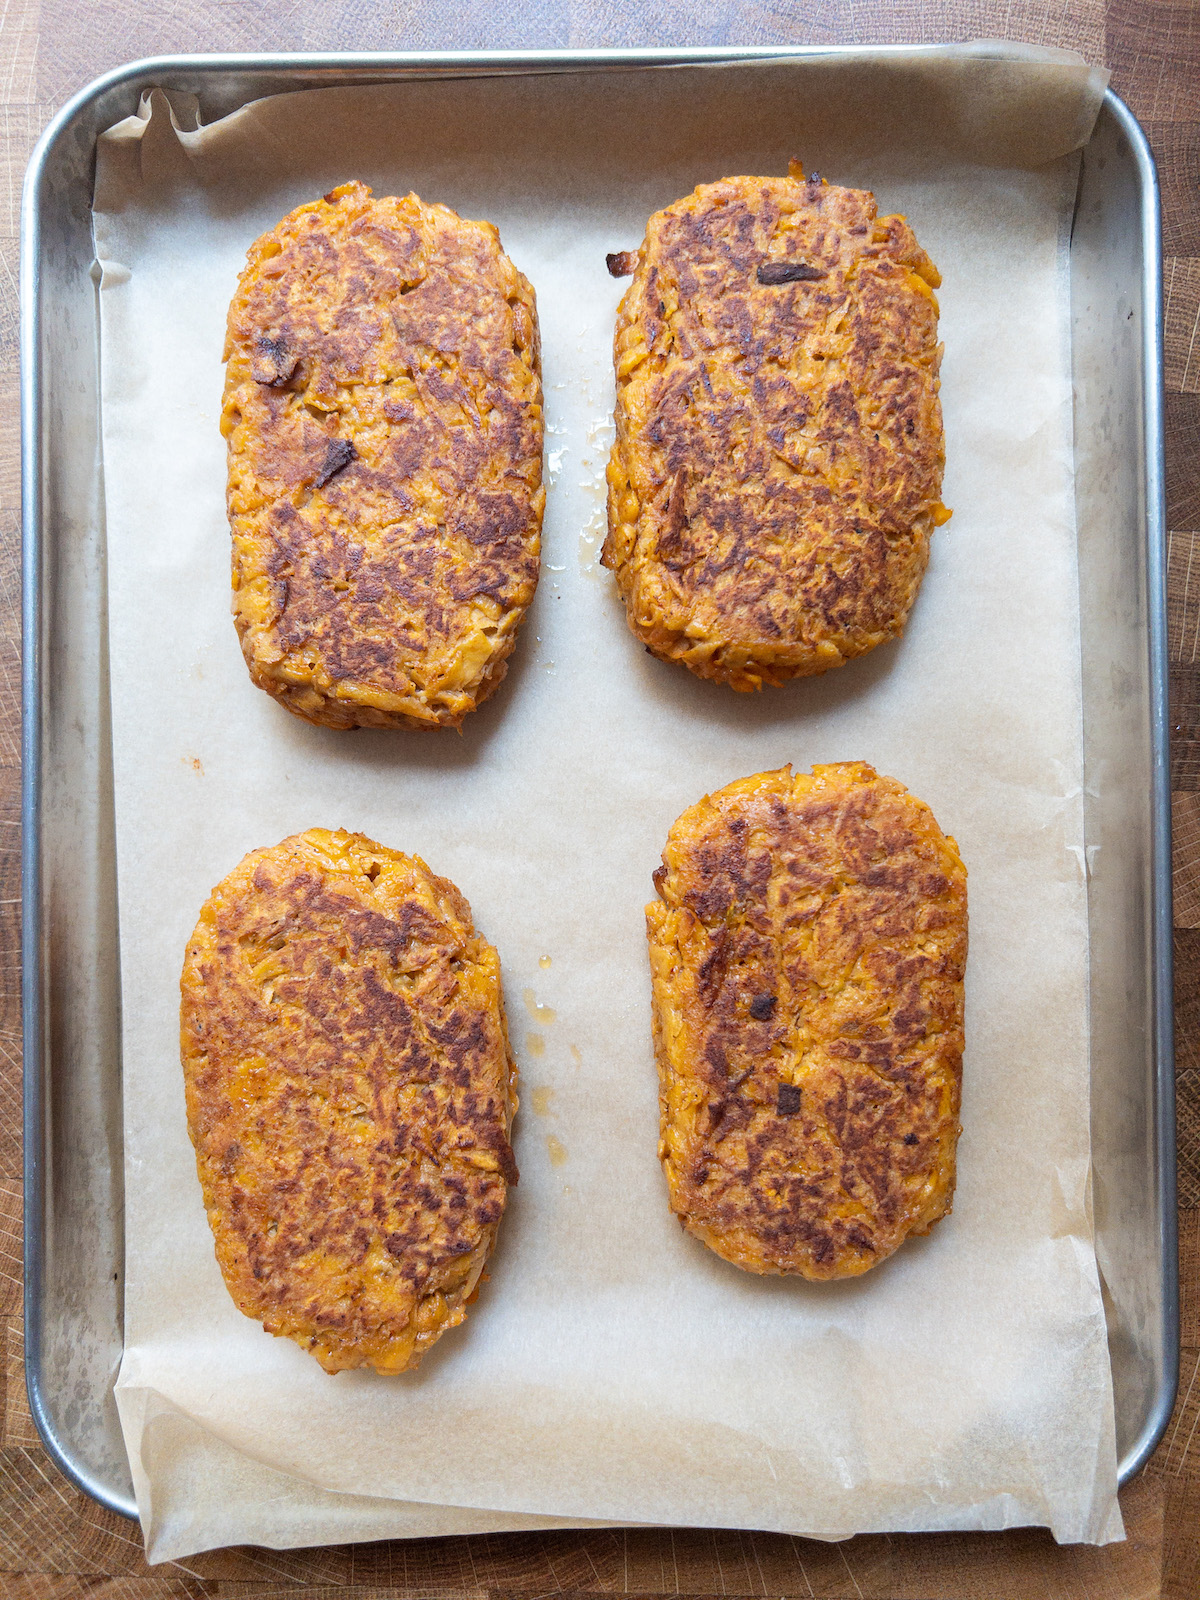 Sweet potato hash browns on a silver tray